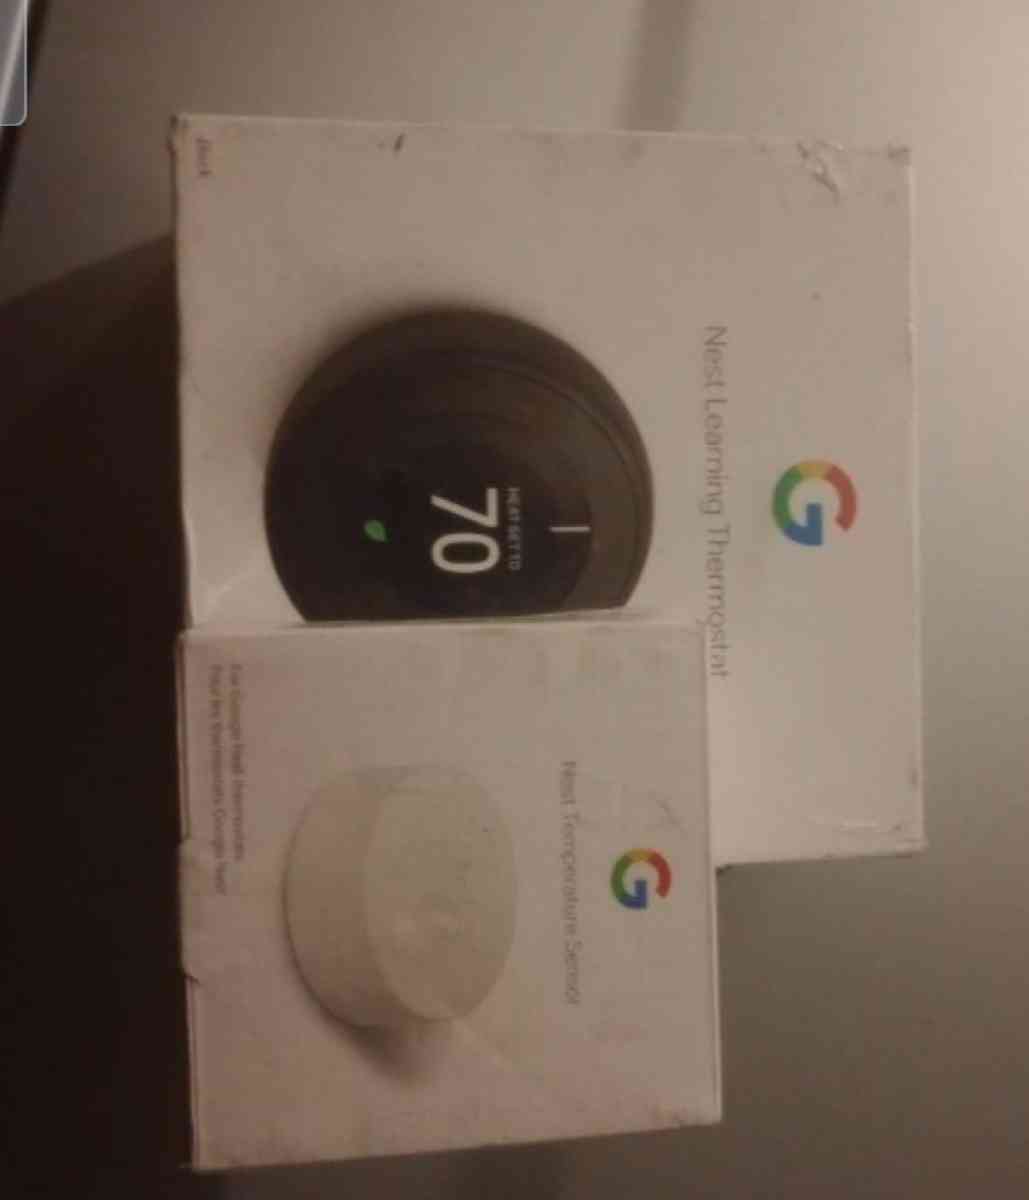 Google nest learning thermostat and sensor